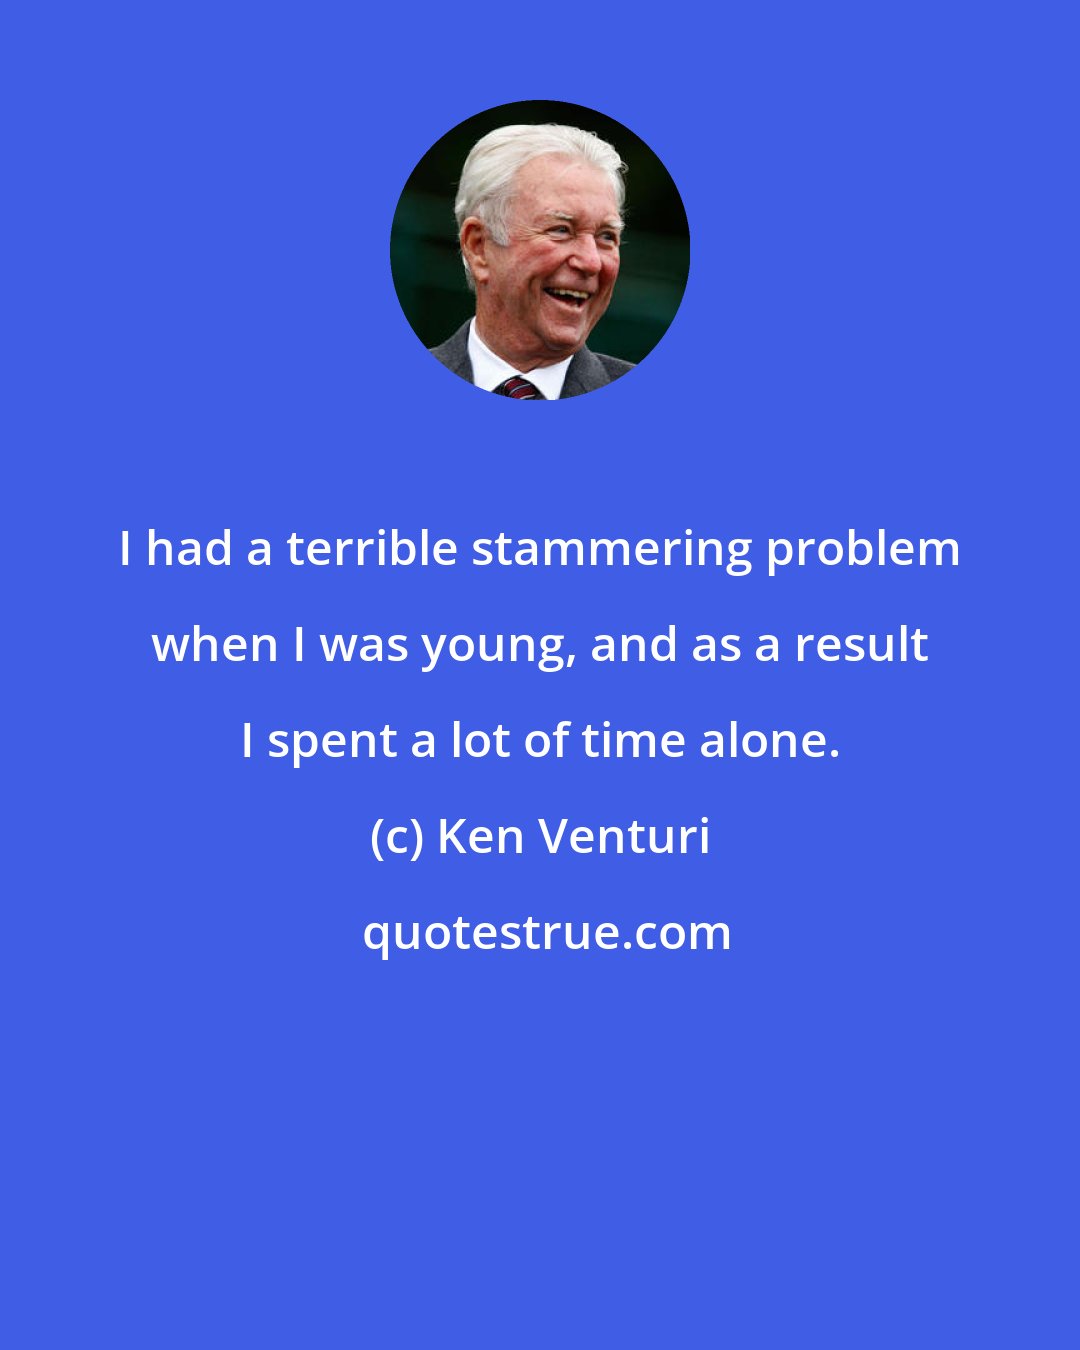 Ken Venturi: I had a terrible stammering problem when I was young, and as a result I spent a lot of time alone.